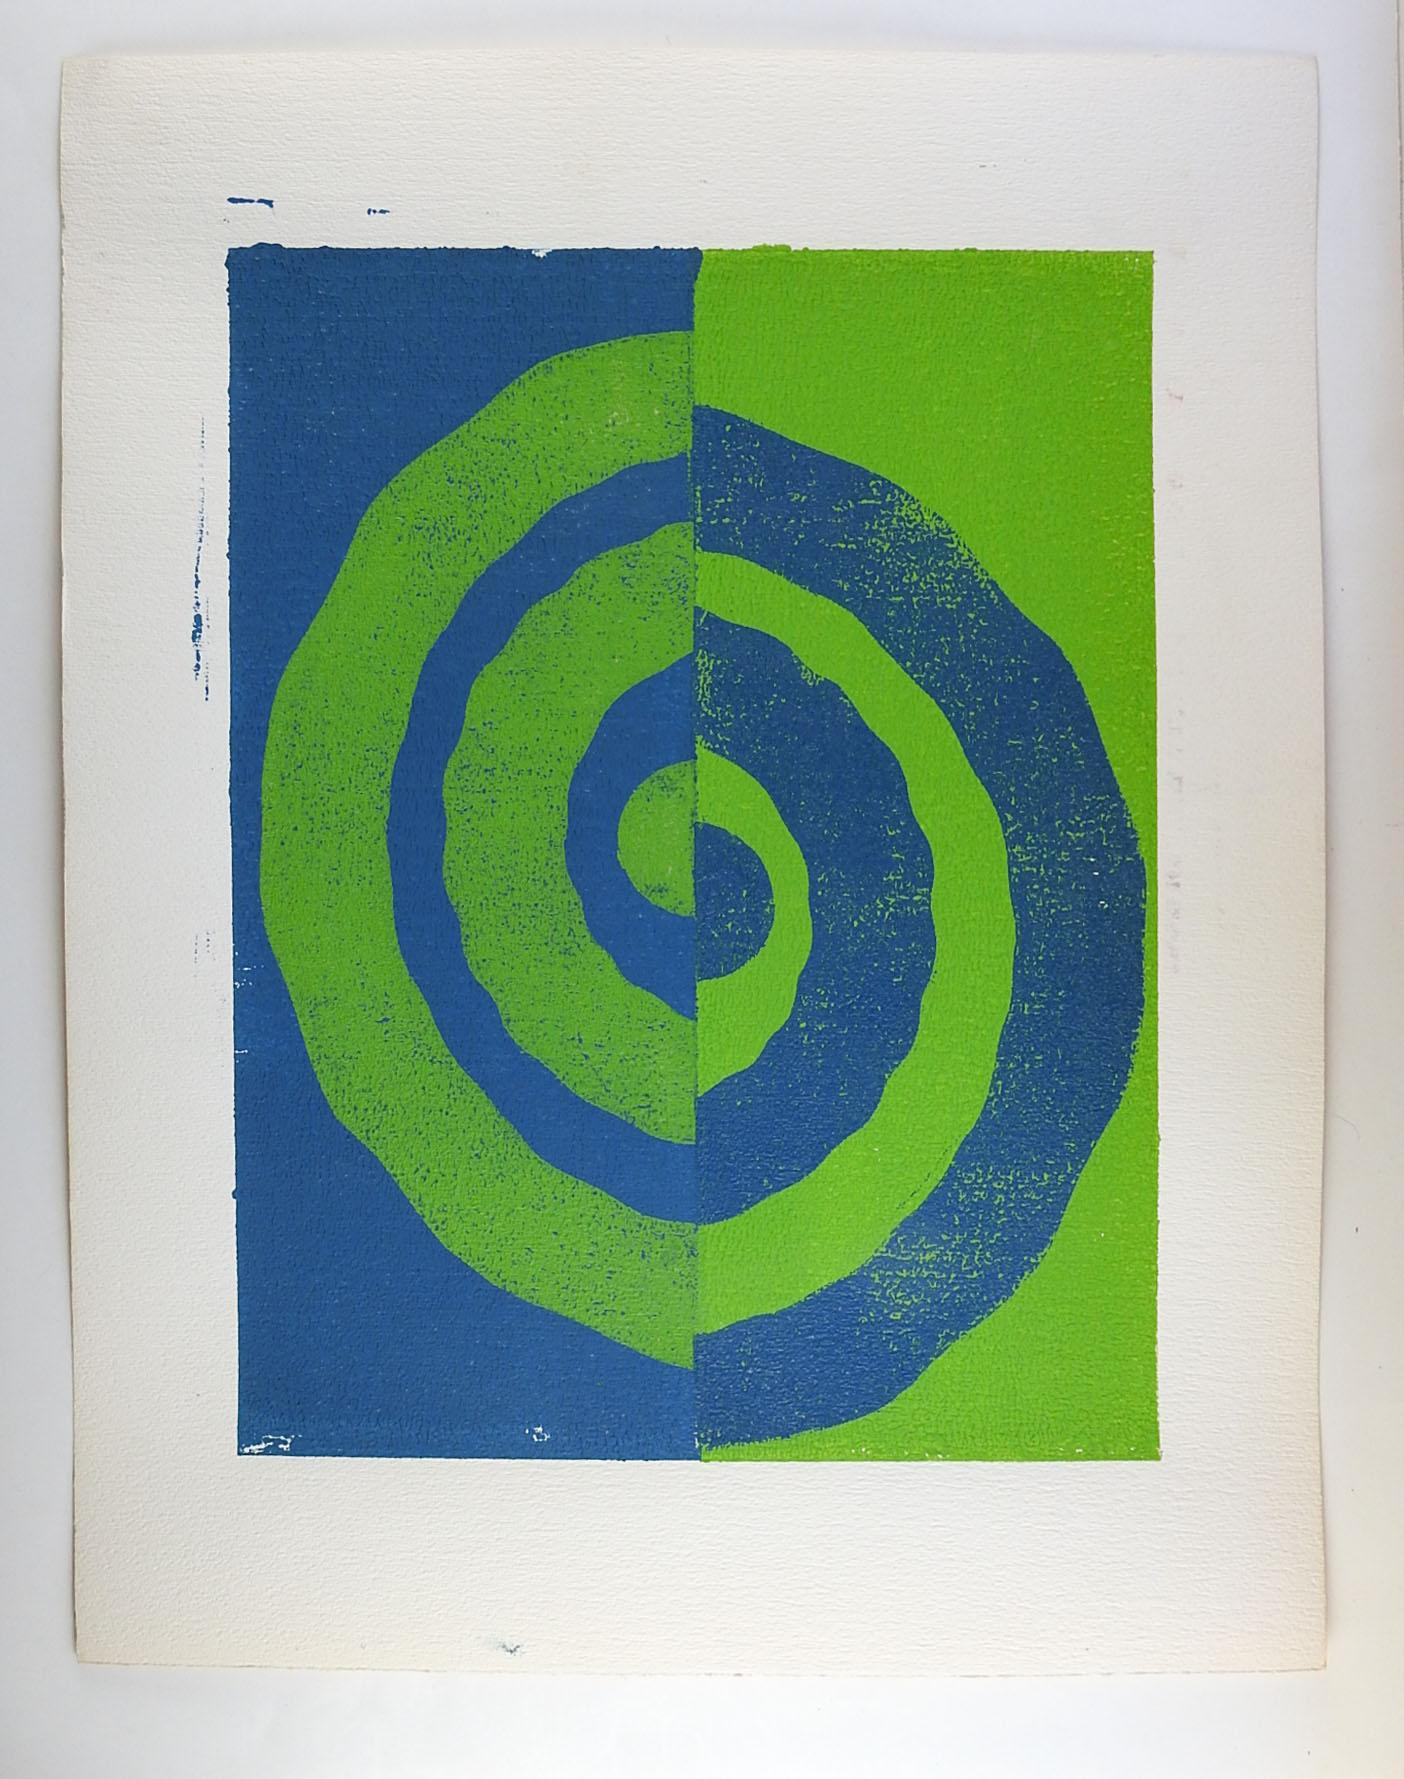 Vintage block print on paper of abstract spriral. Unframed, unsigned, edge wear.